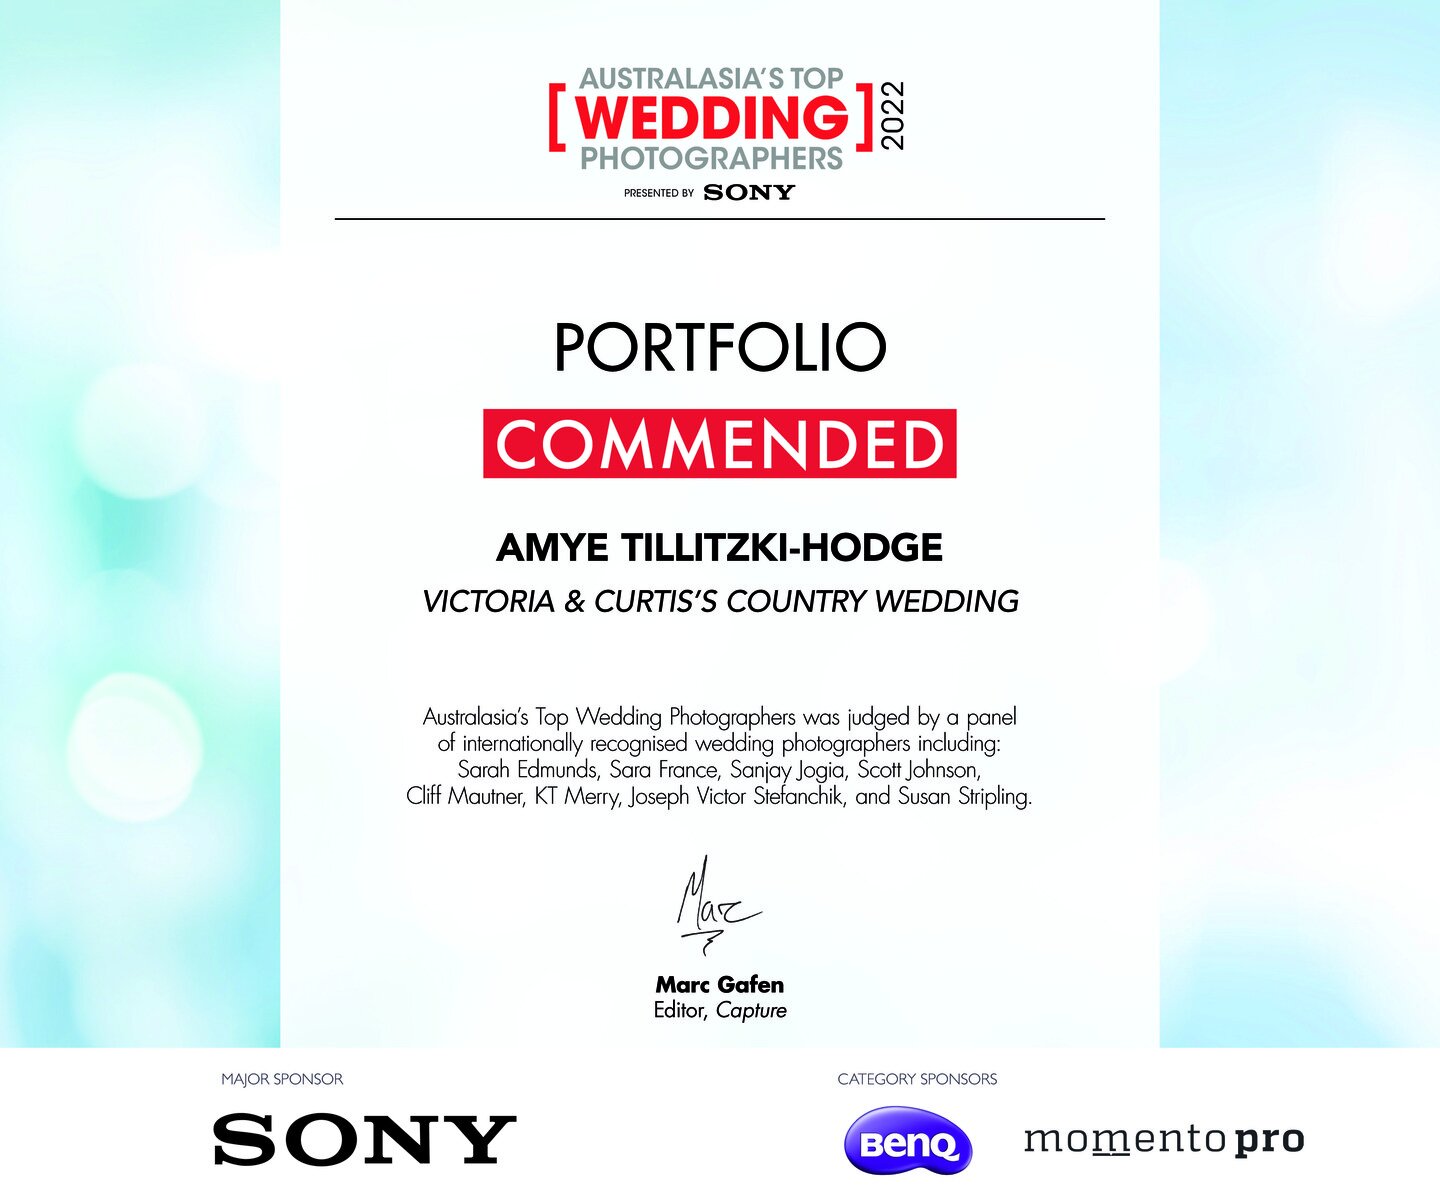 Well this was a nice little surprise this week. I found out that I have received 3 awards from The Australasia's Top Wedding Photographers Competition for my photos from Victoria &amp; Curtis's country wedding I photographed last year! 

#capturemaga